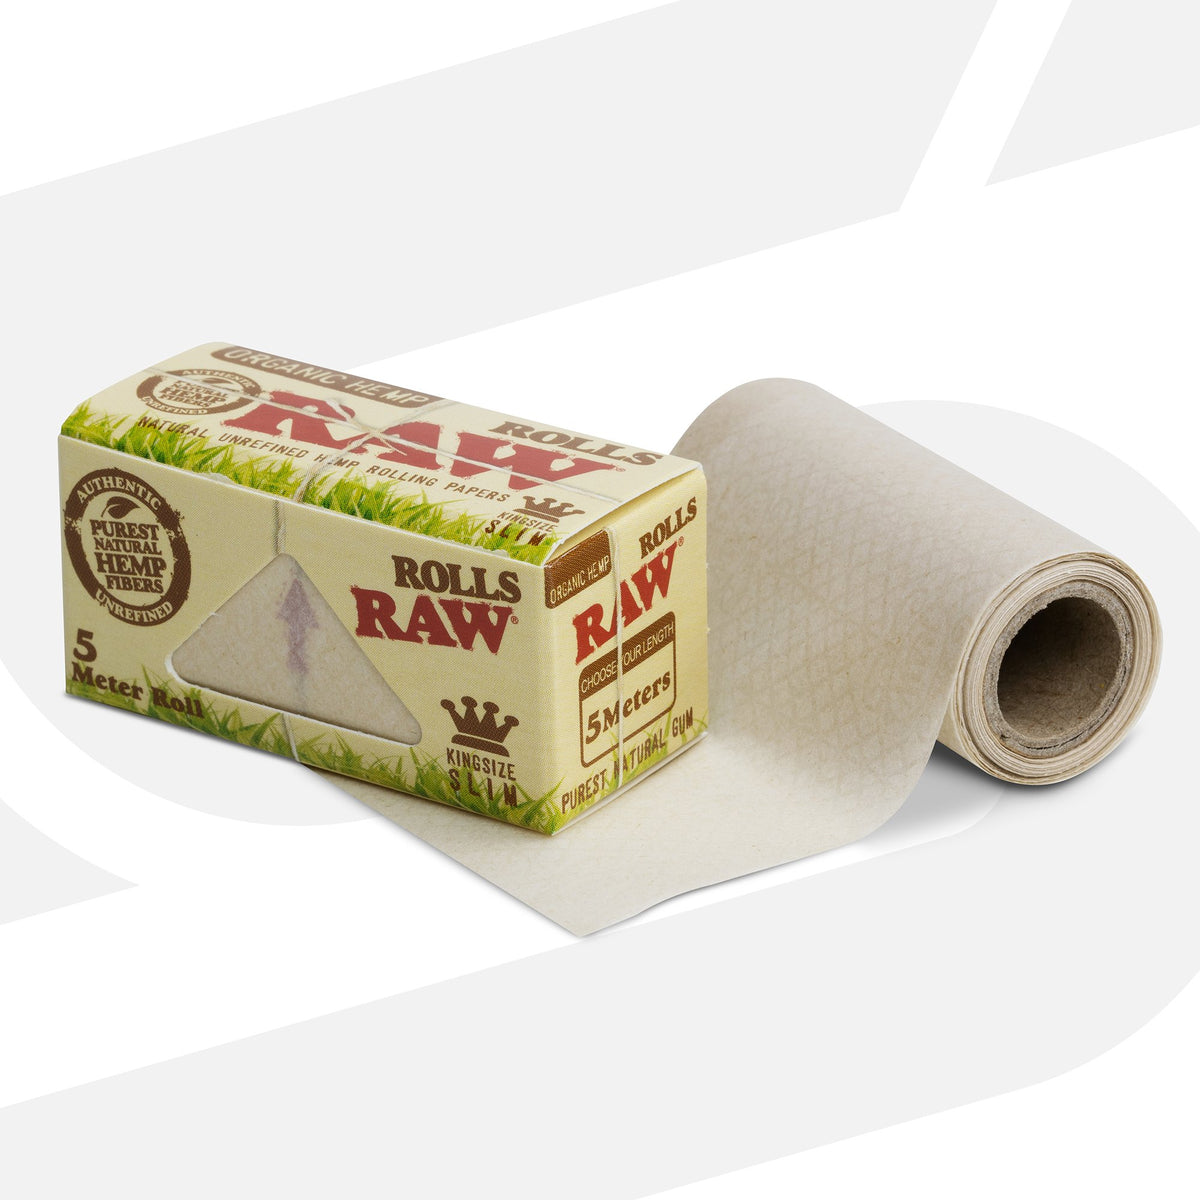 RAW Organic King Size Slim Paper Rolls - 5 Meters Rolling Papers esd-official